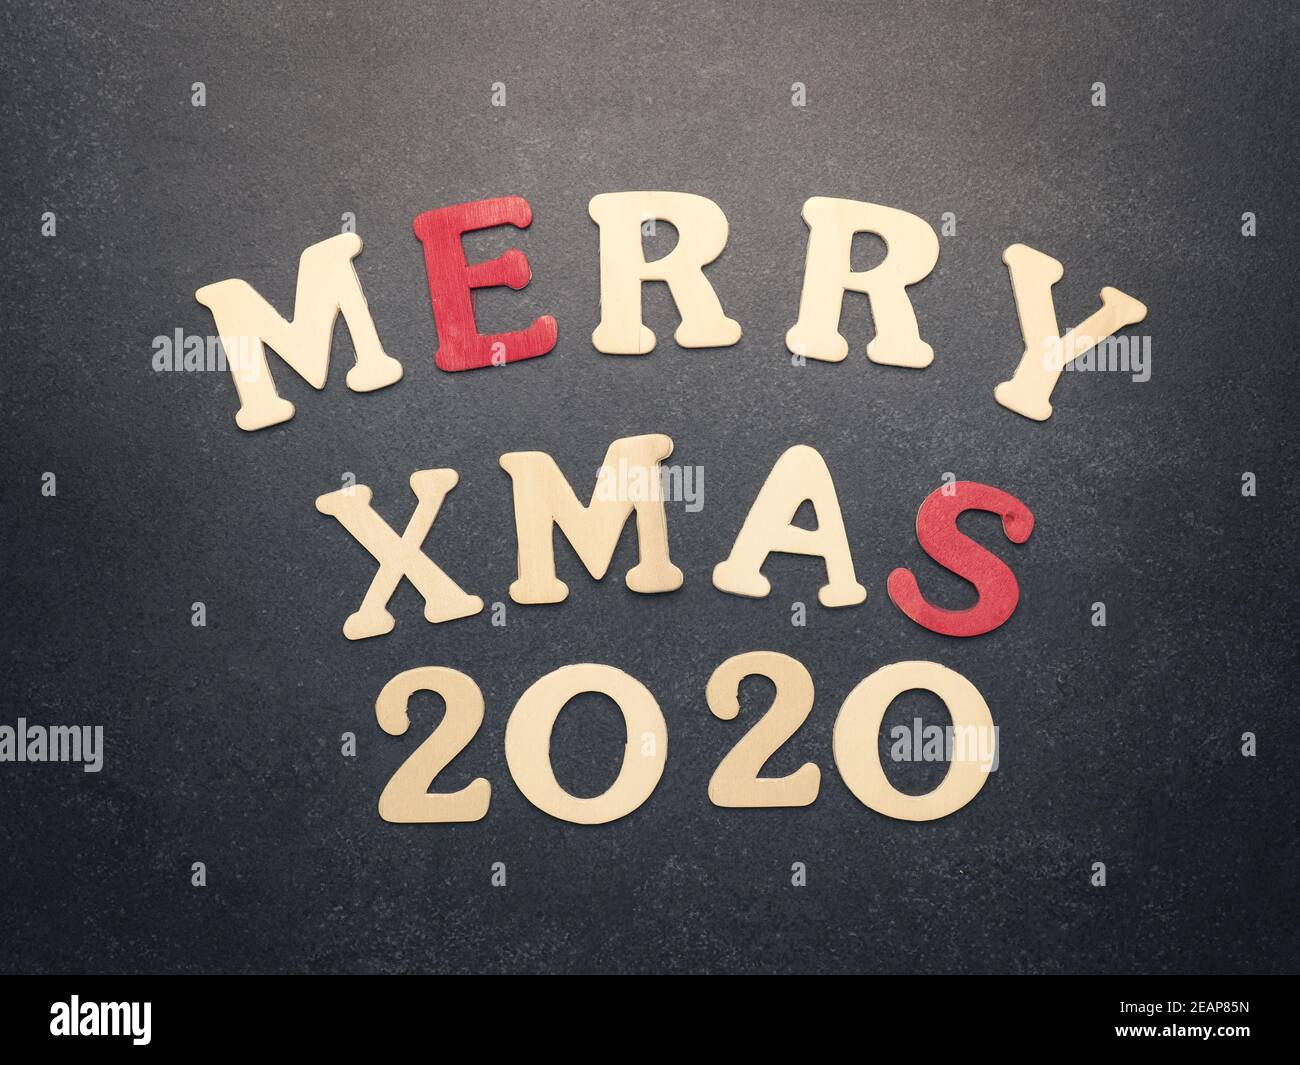 The words Merry Xmas 2020 on a chalkboard Stock Photo